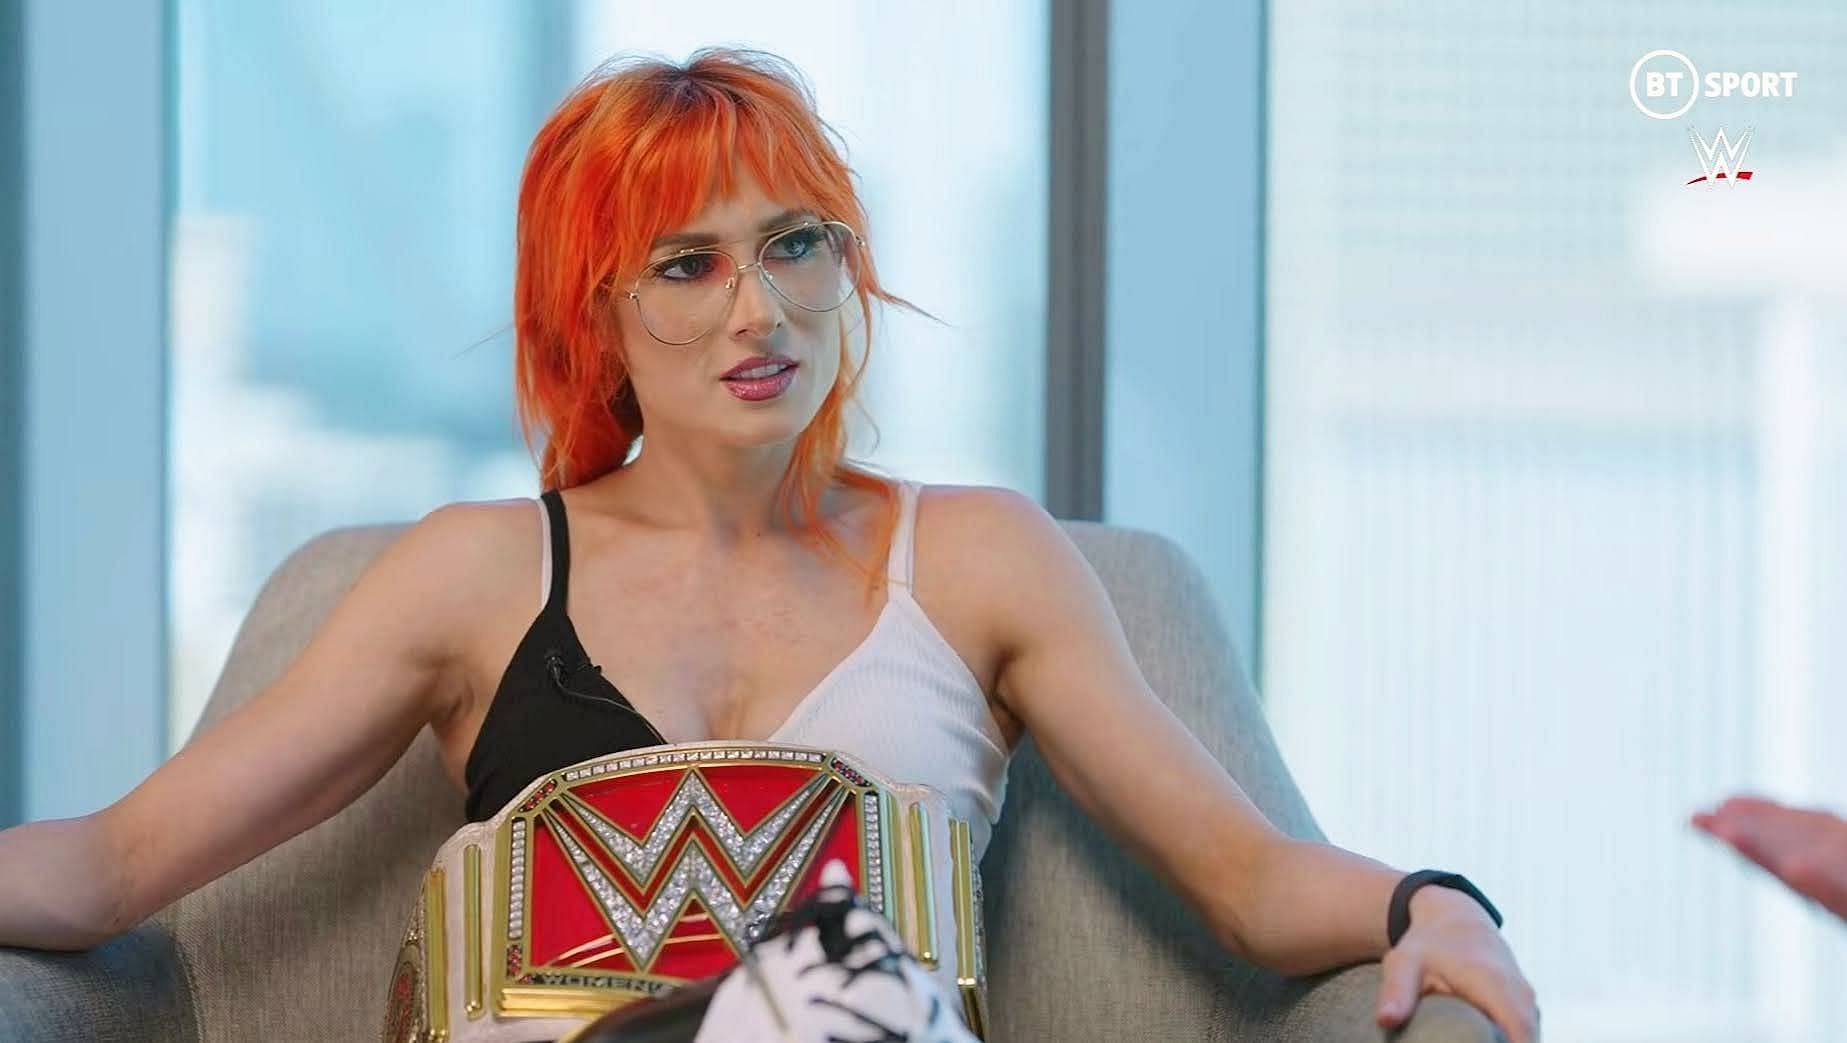 Lynch during an interview while she was still champion.